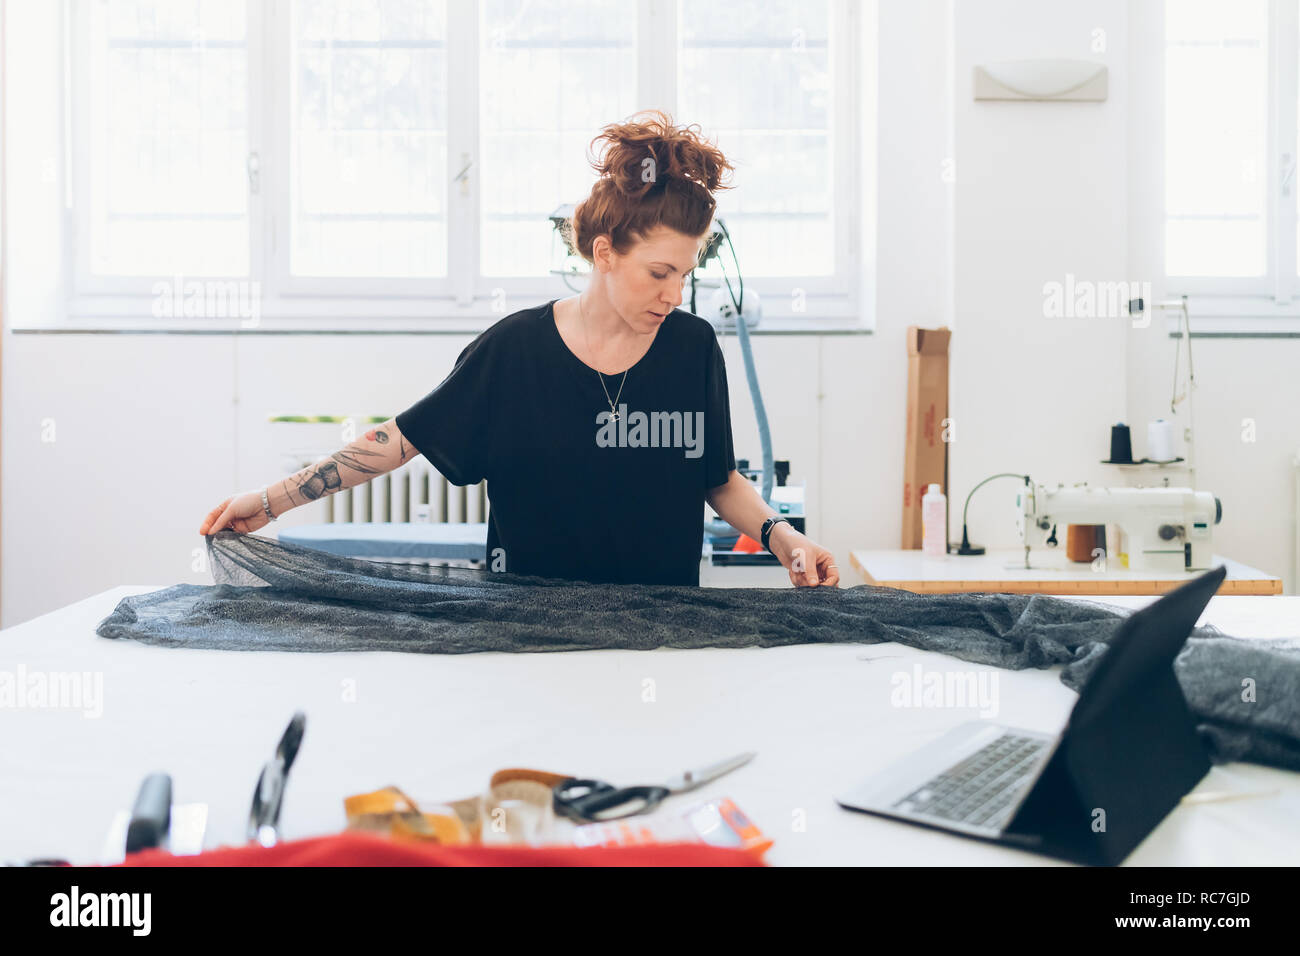 Fashion designer laying out fabric on workbench Stock Photo